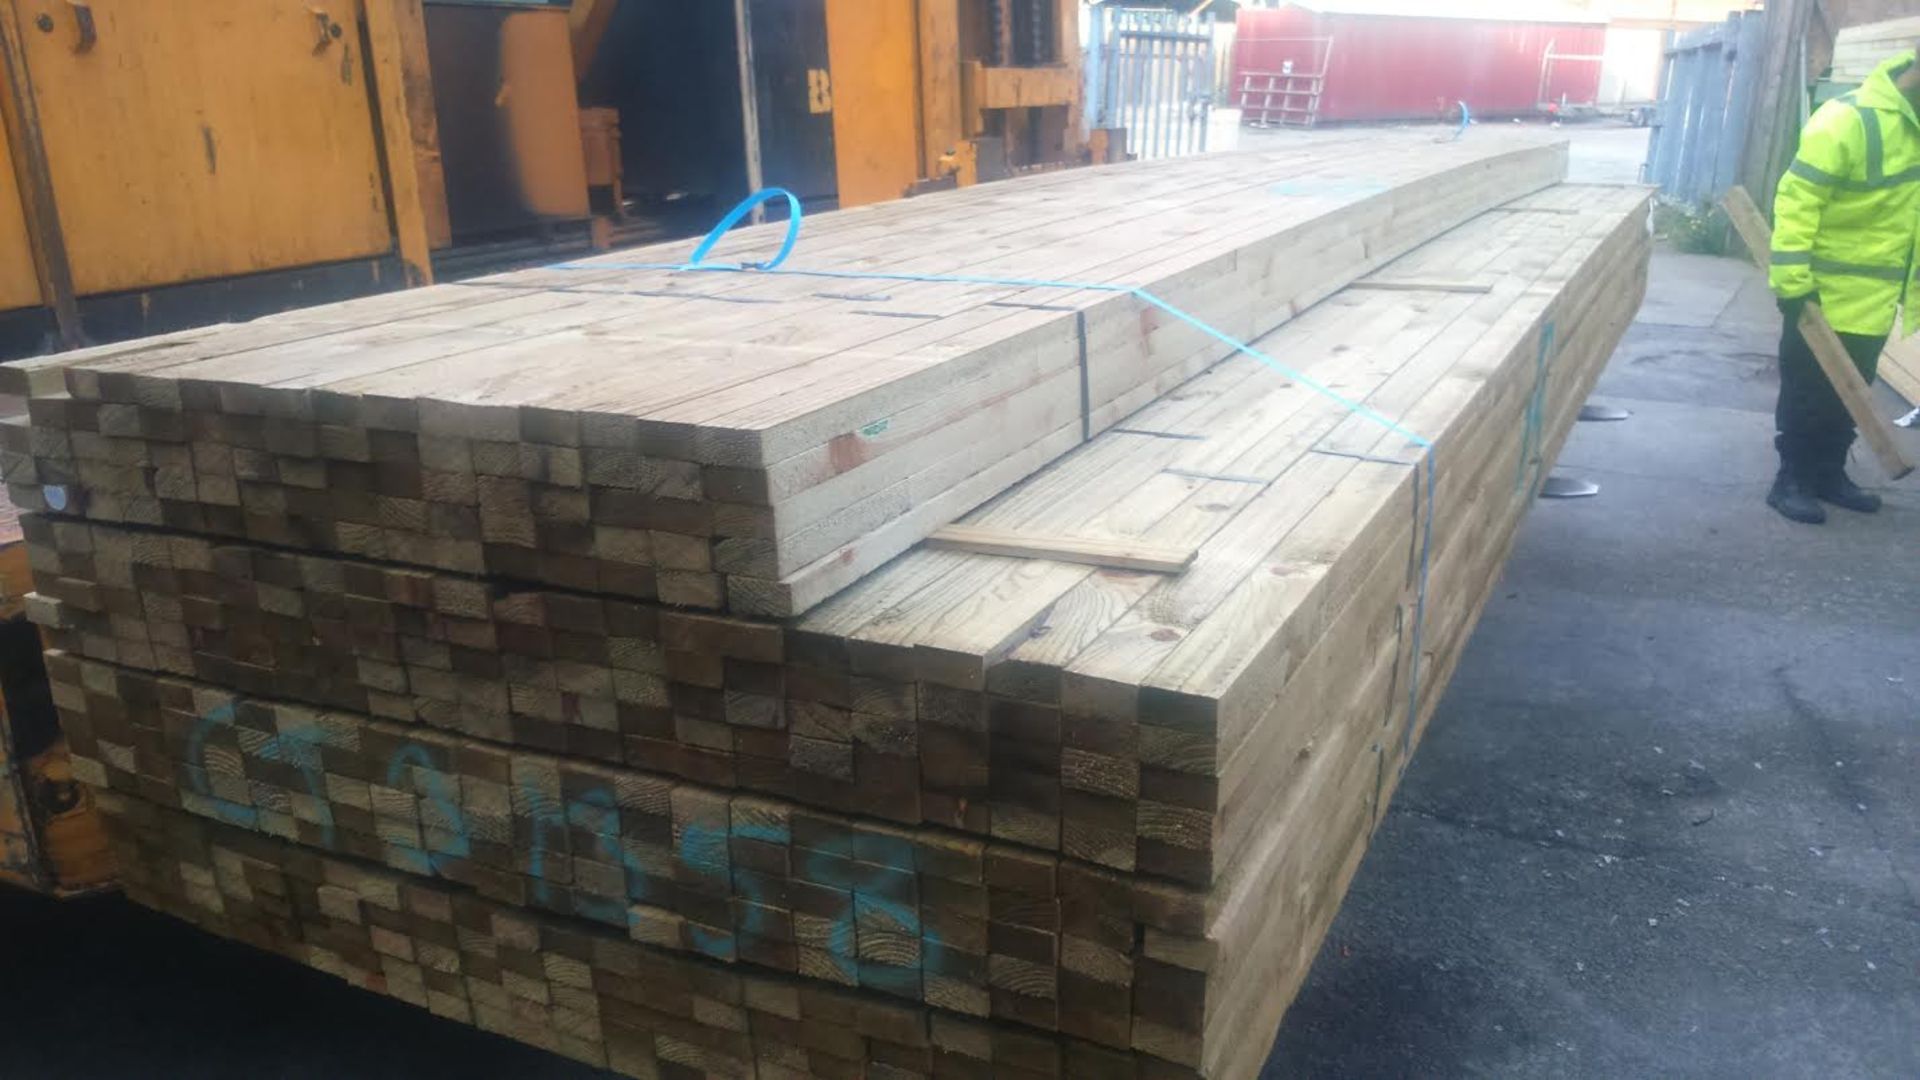 410 x Pieces of Unused Tile Batten Treated Timber - Size: 25 x 50 x 4.8m - Ref Lot 13 - CL151 - - Image 3 of 3